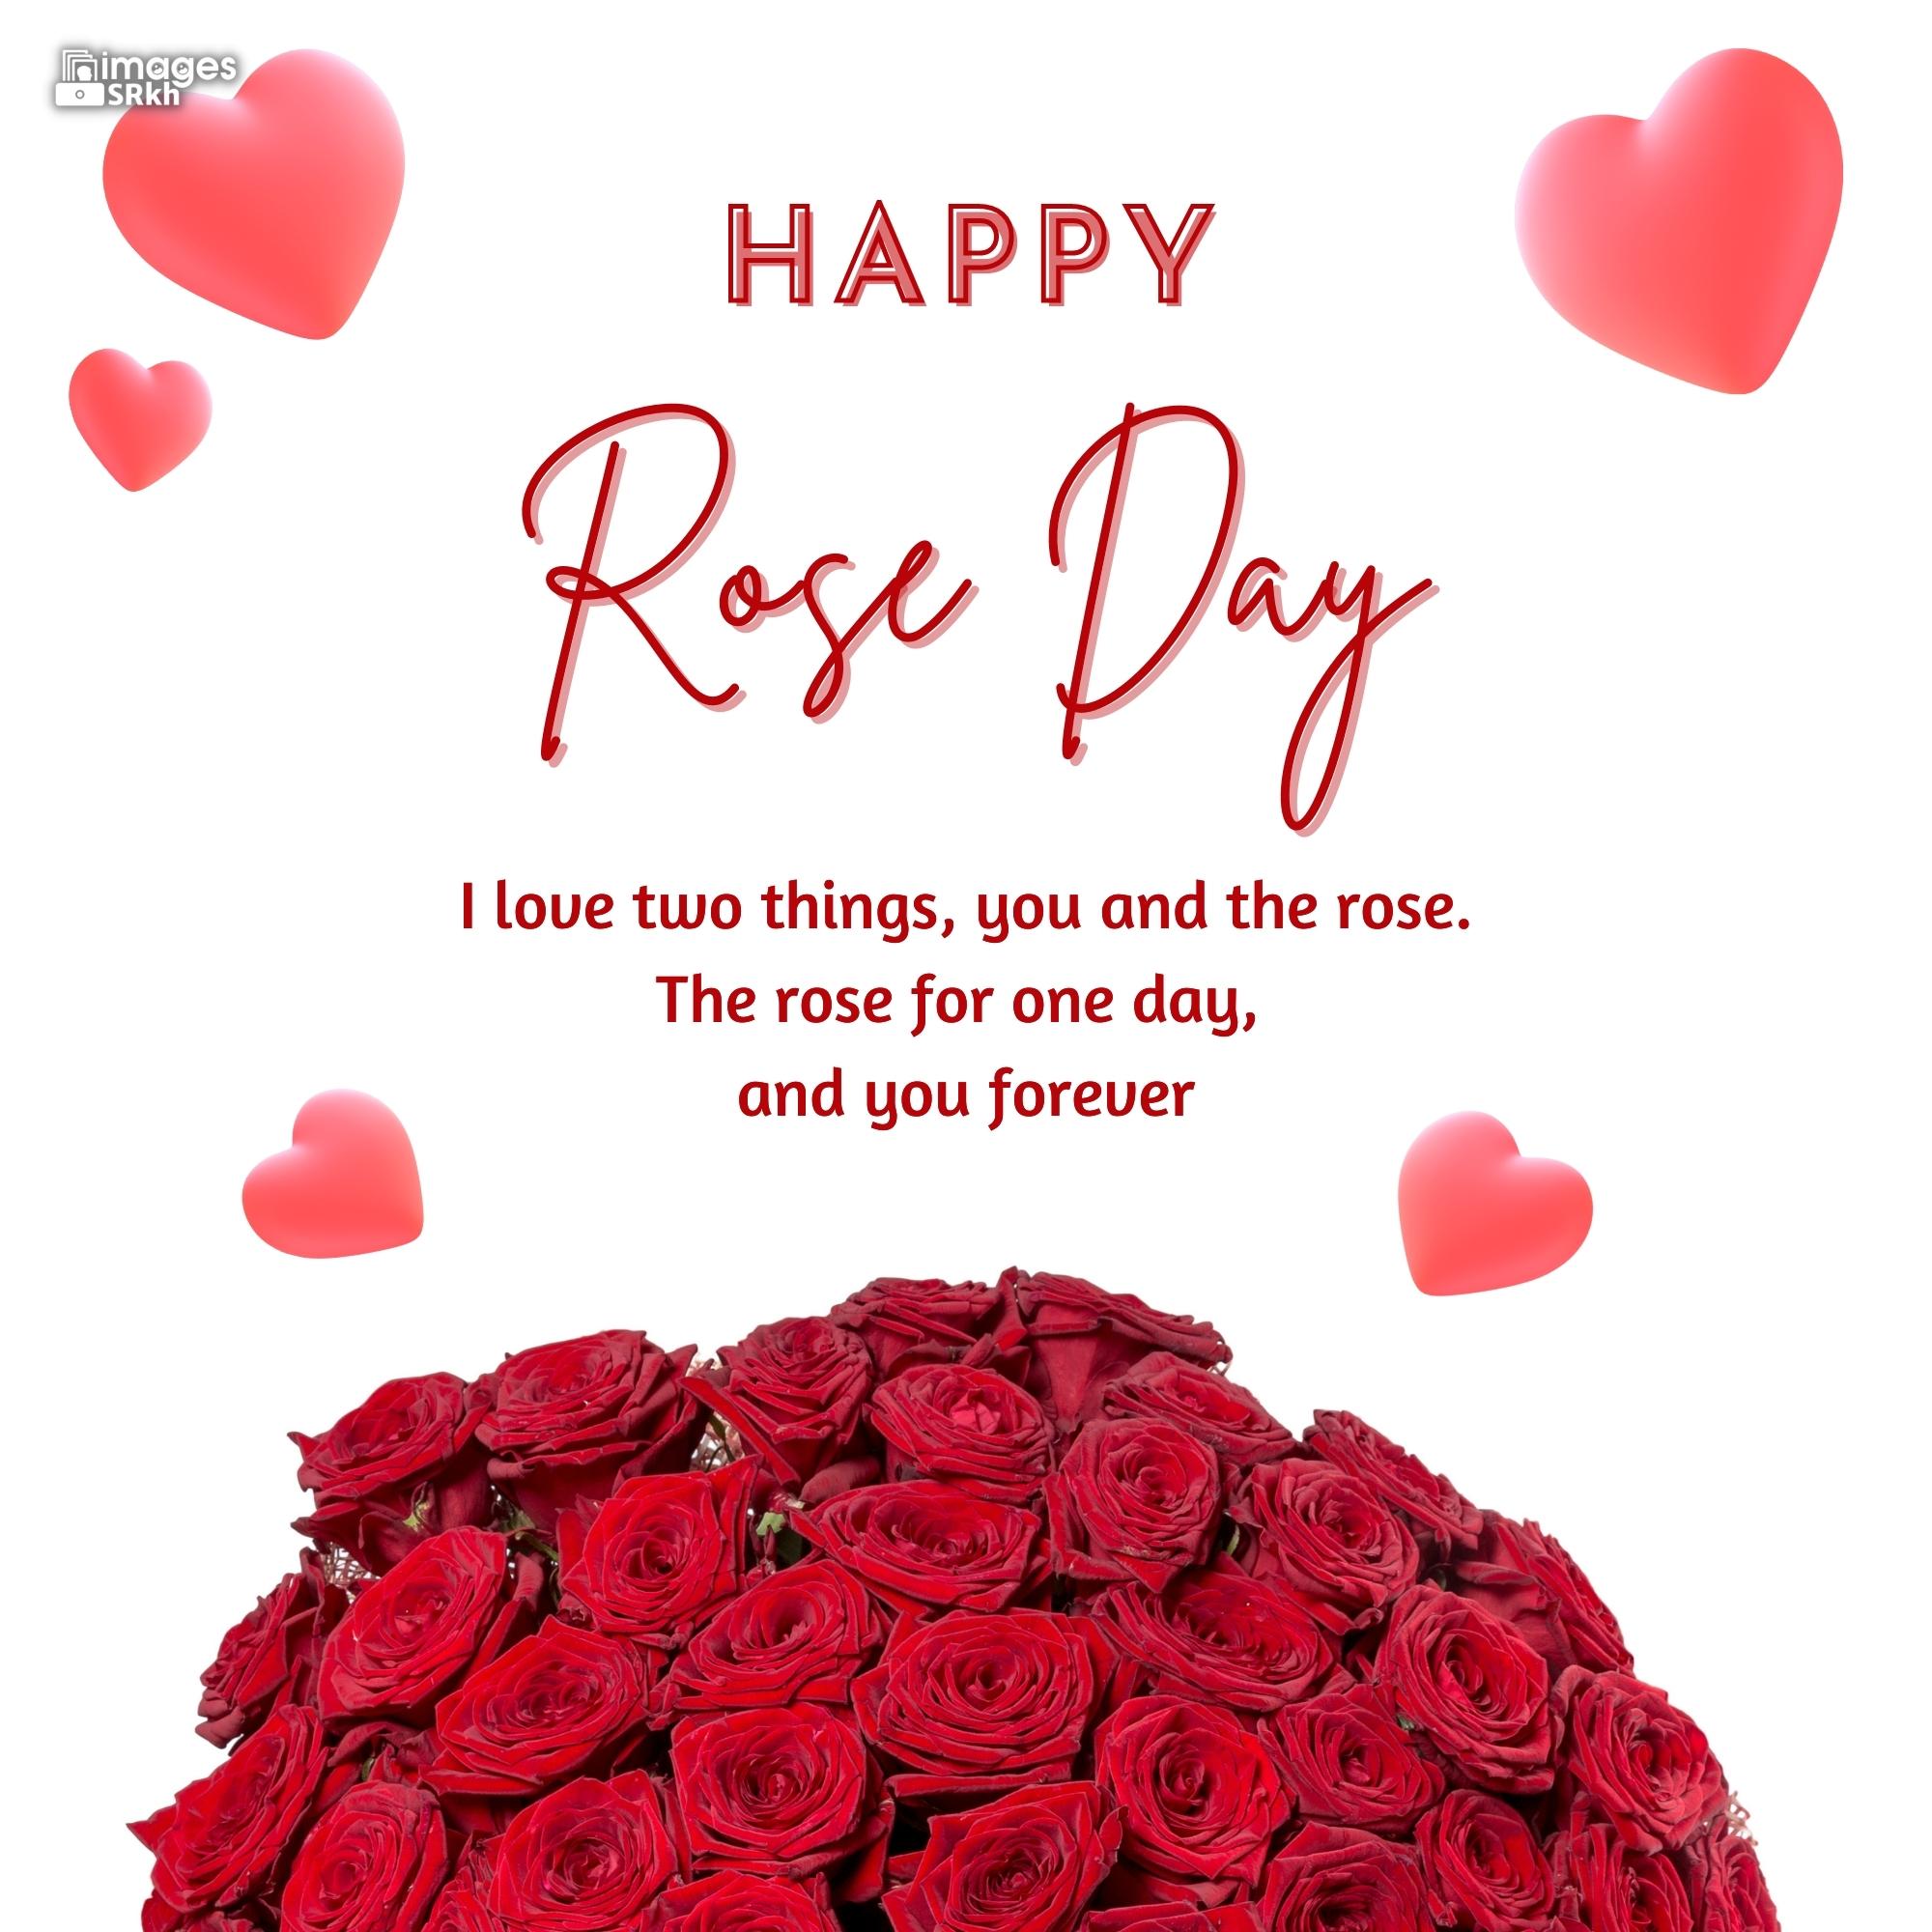 Happy Rose Day Image Hd Download (84)